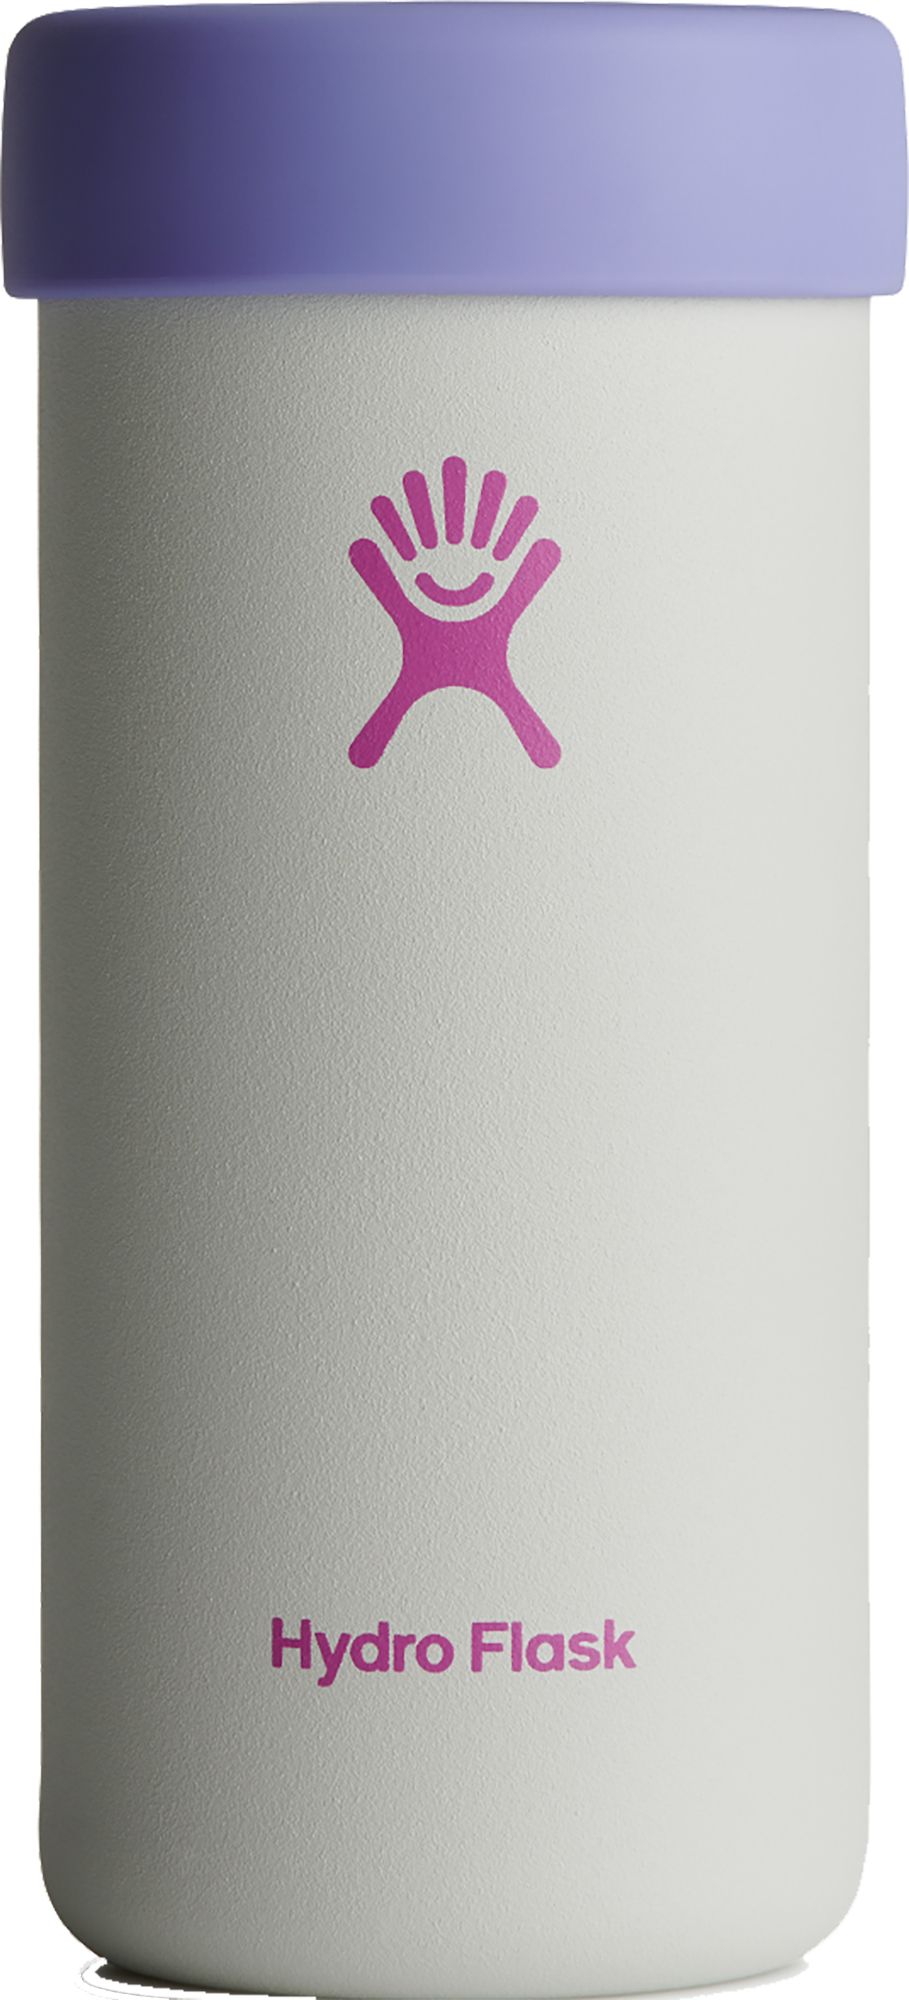 Hydro Flask 12 oz Slim Cooler Cup, Float